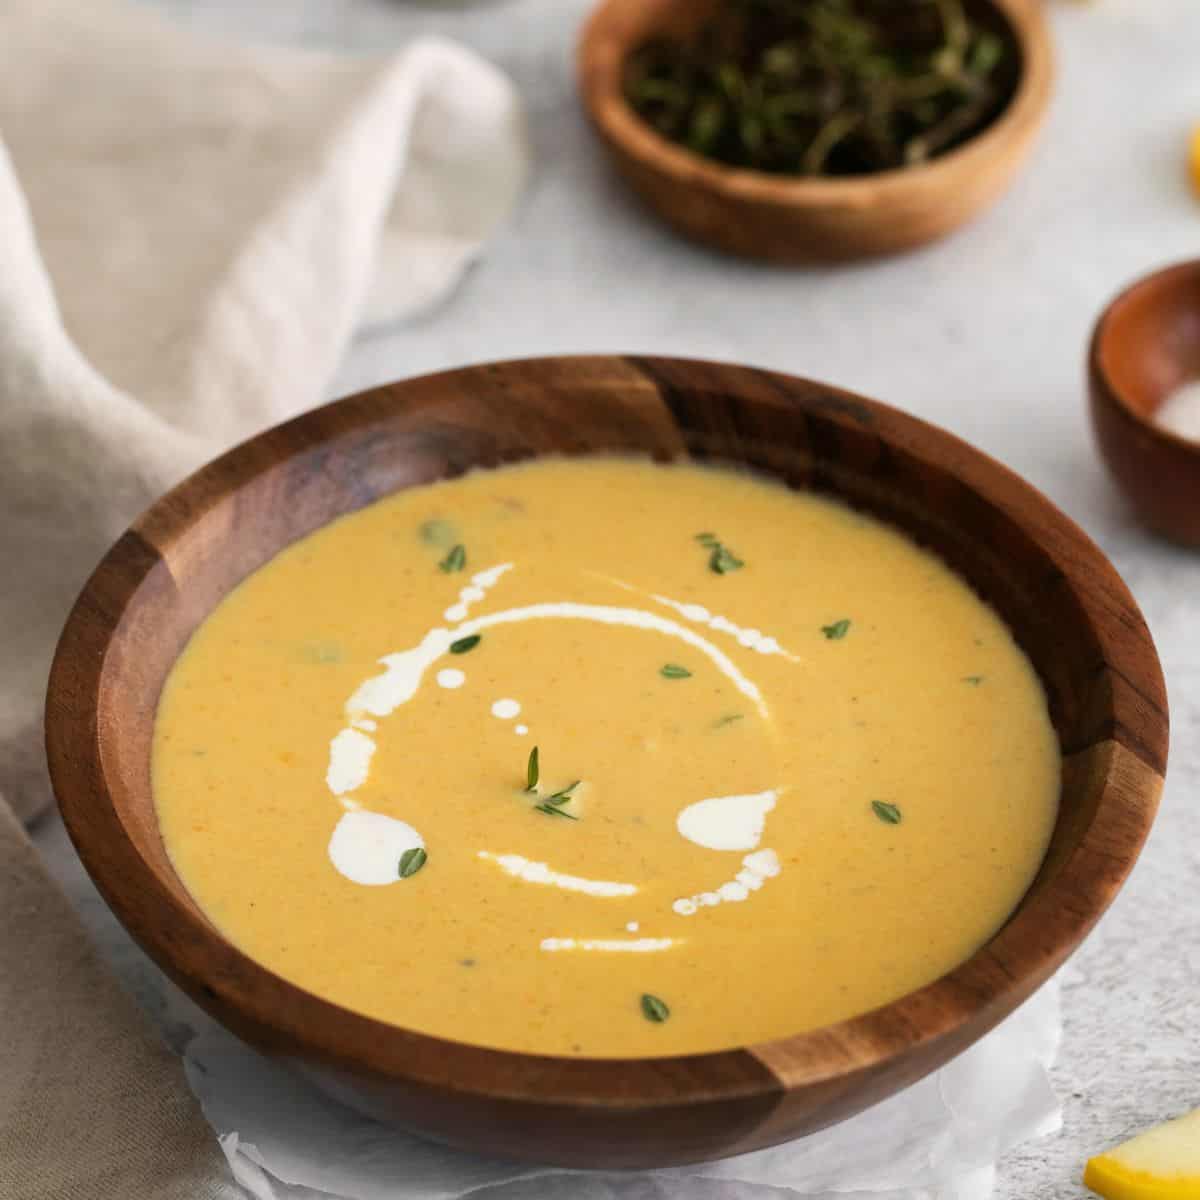 Creamy Summer Squash Soup Recipe- a delicious and simple soup made with summer squash, potatoes, and vegetables.  Vegan/MedDiet